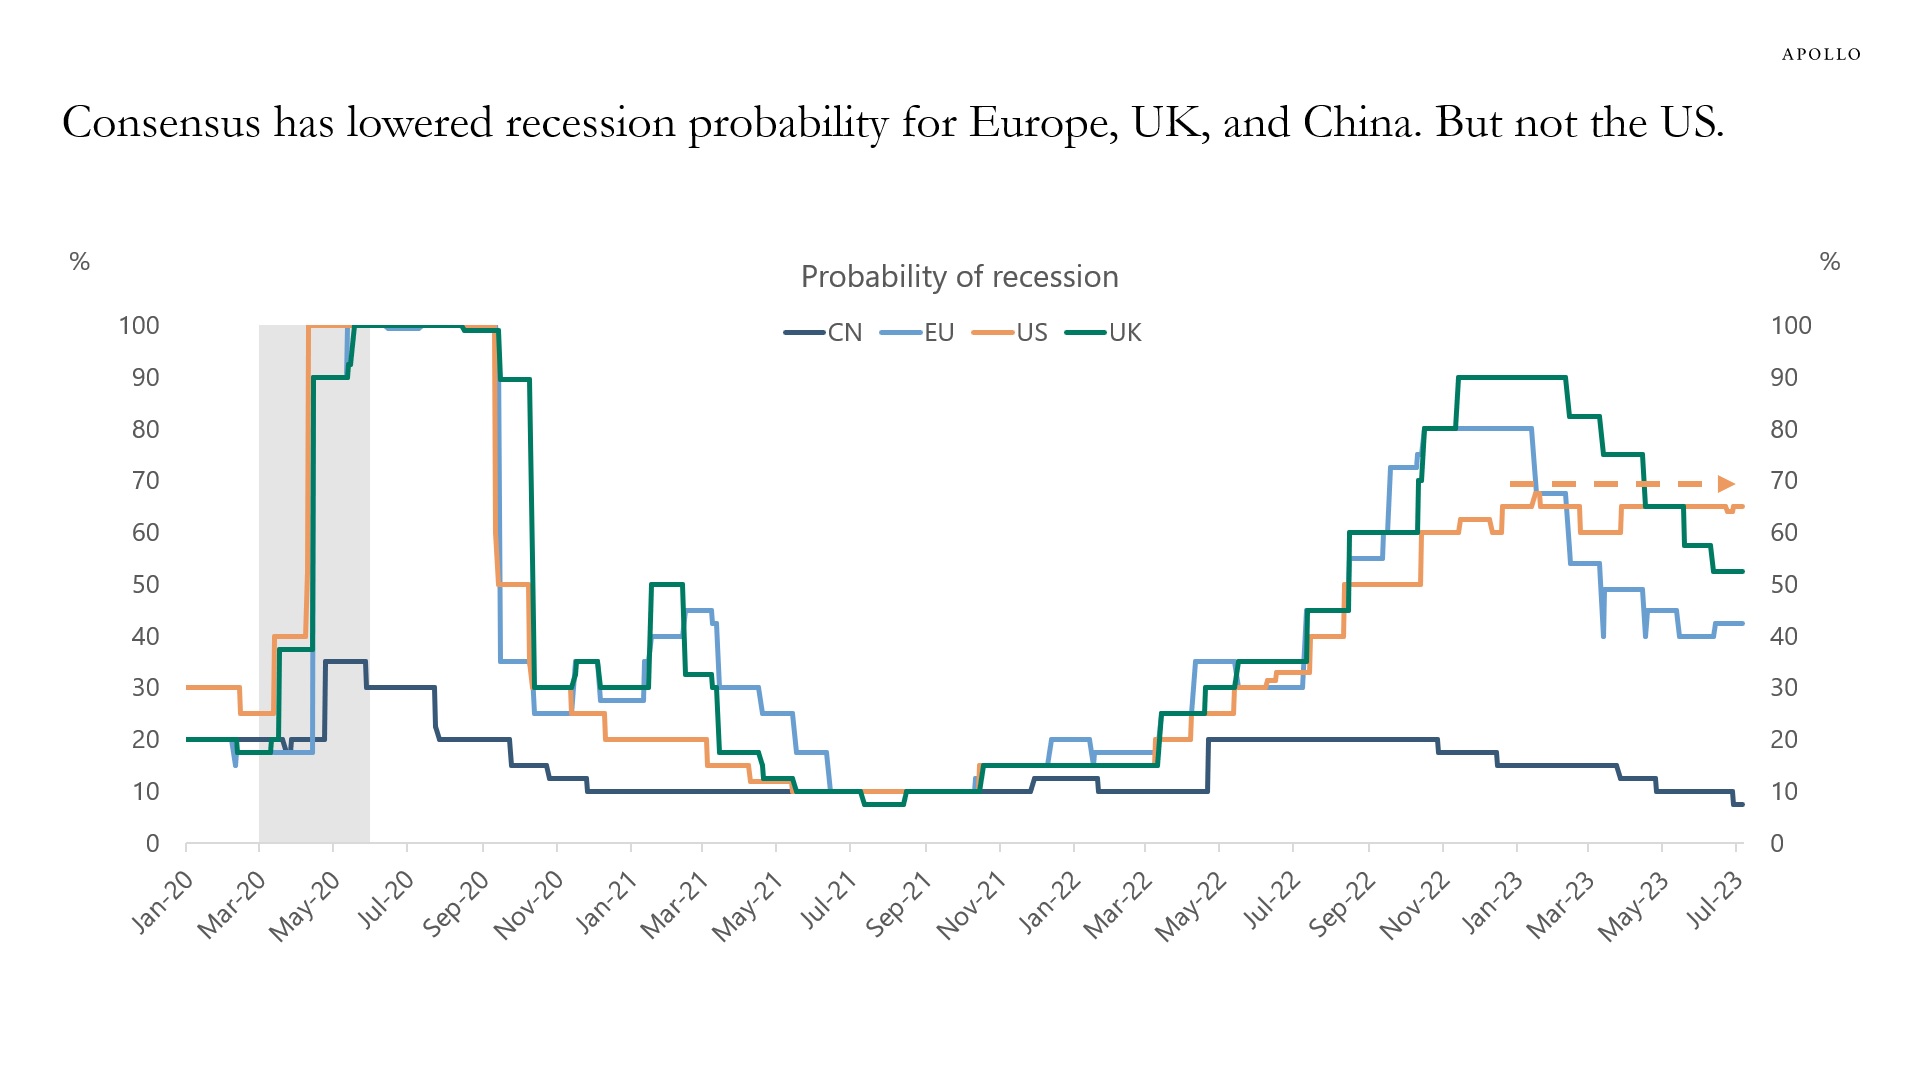 Consensus expectations for recession is higher for the US than for Europe and UK.